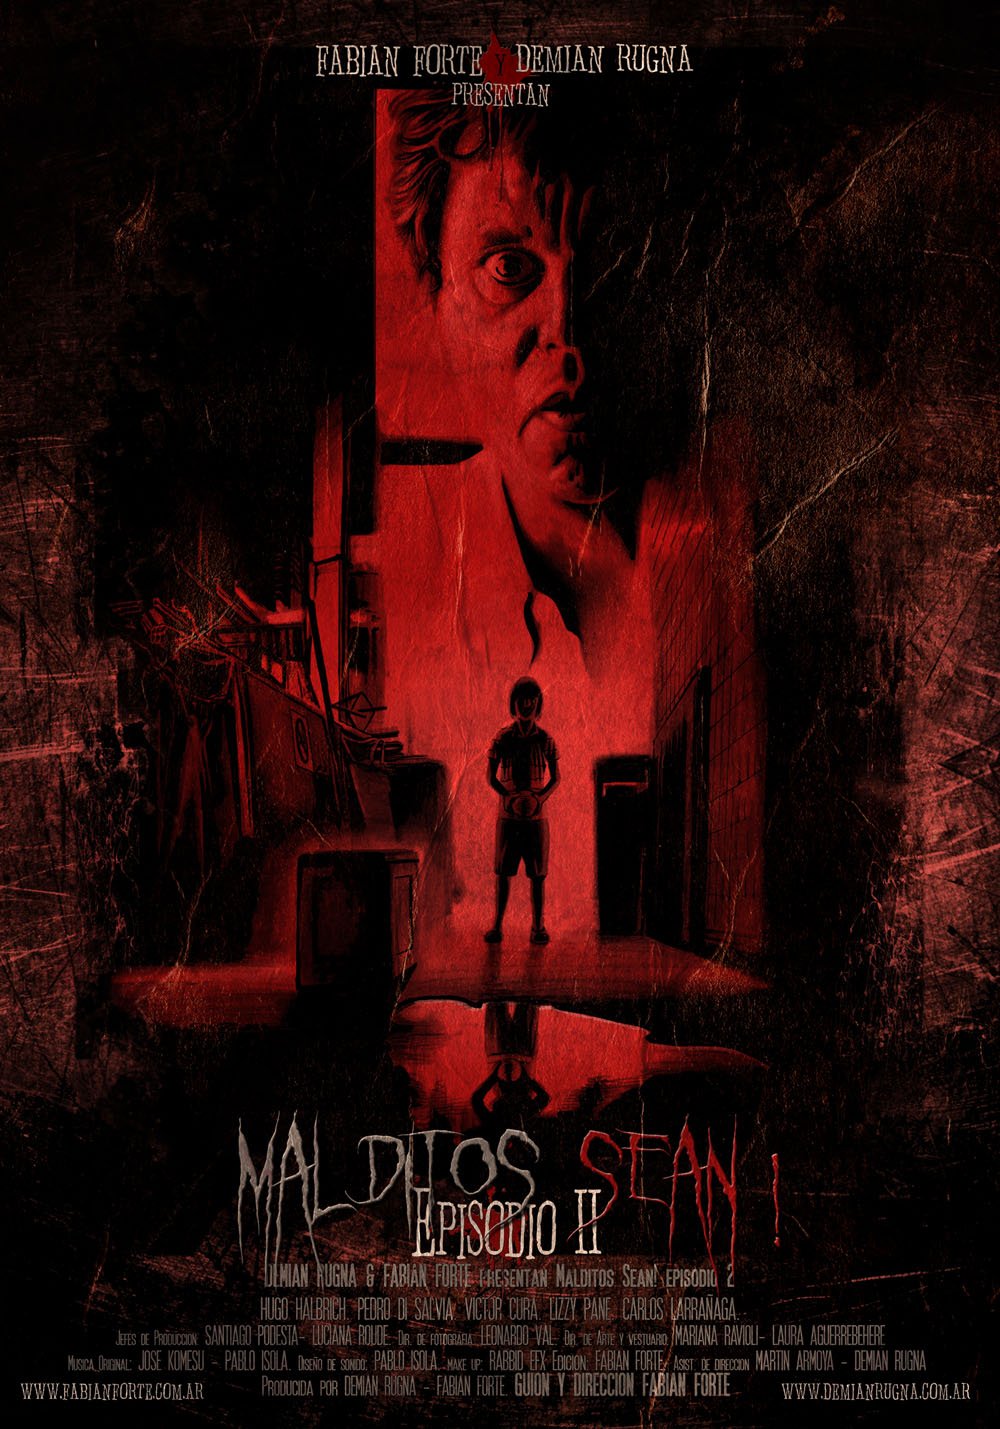 Extra Large Movie Poster Image for Malditos sean! (#3 of 3)